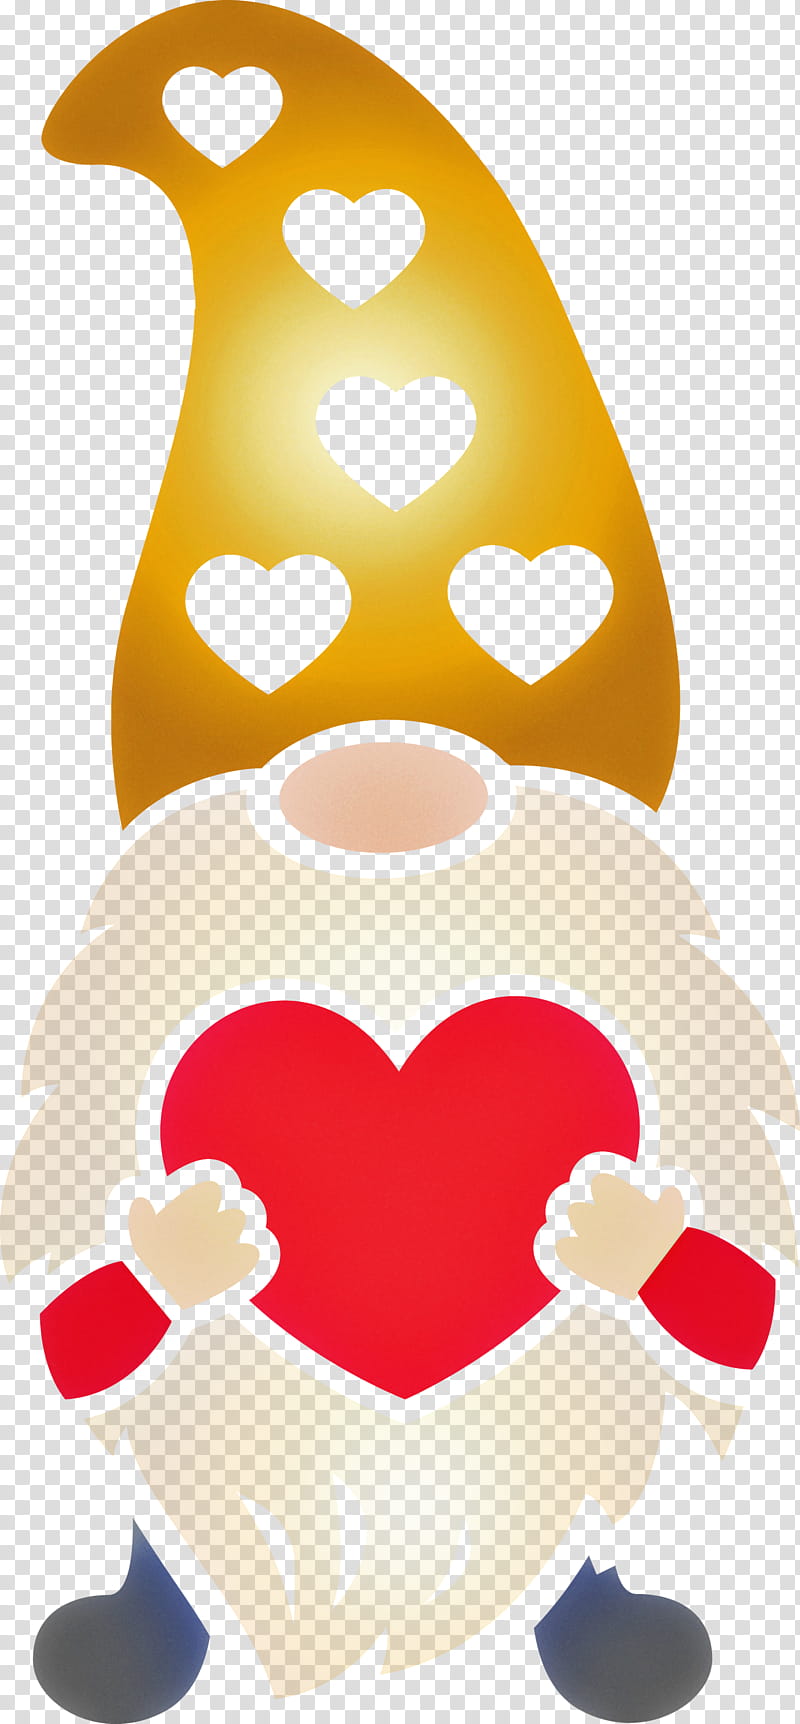 Gnome loving red heart, Cartoon, Yellow, Nose, Love, Smile transparent background PNG clipart